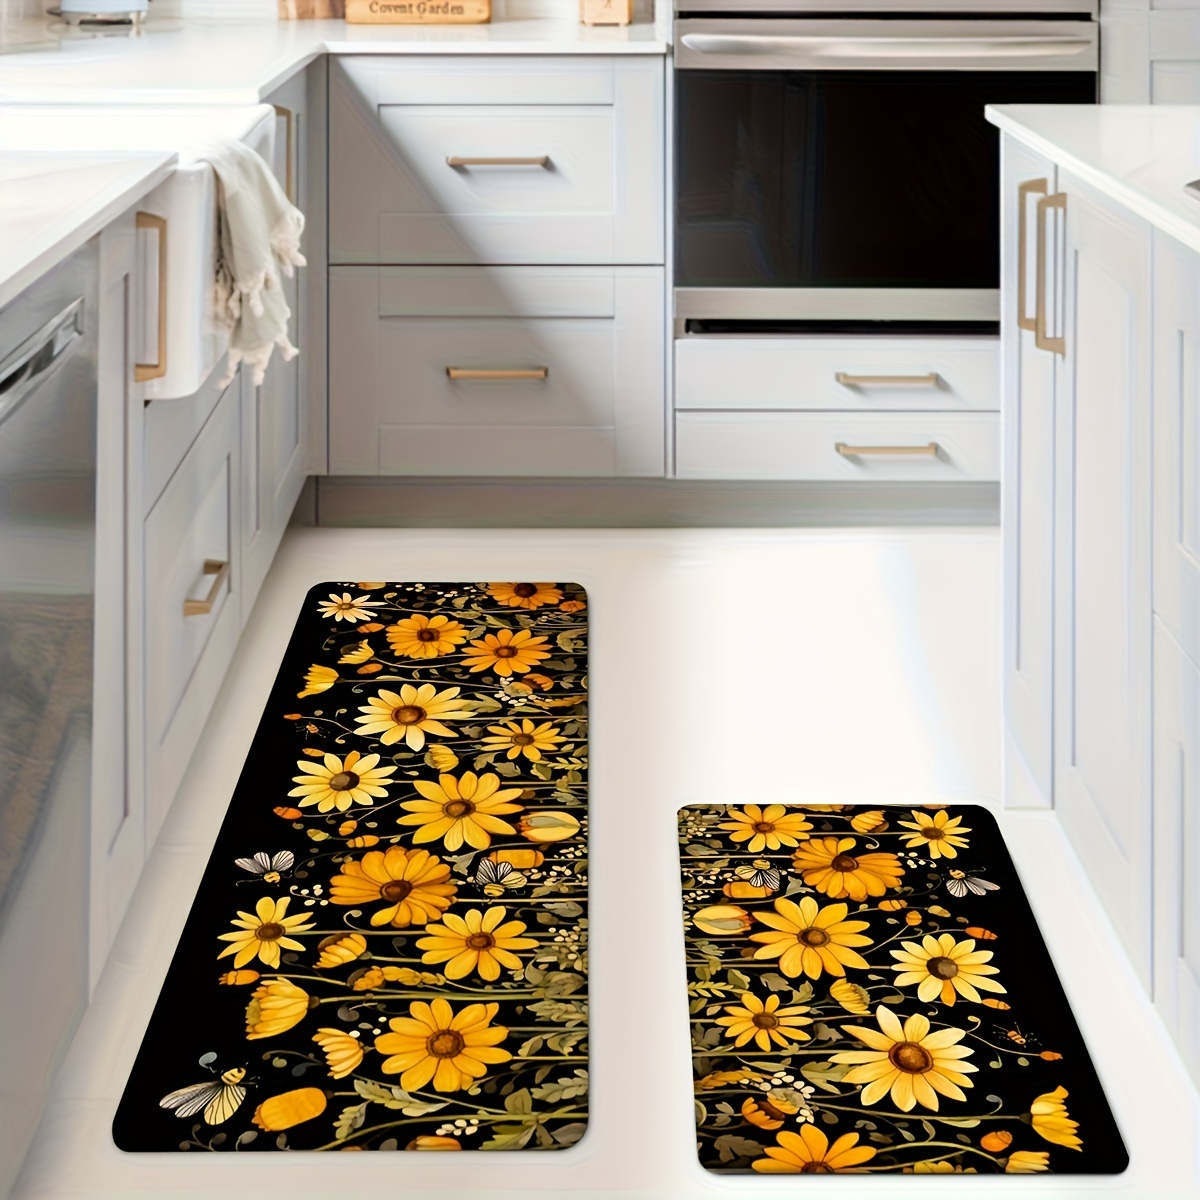 

Sunflower Kitchen Rugs Set Of 3 - Machine Washable, Non-slip Absorbent Polyester Mats For Bedroom, Living Room, Laundry, Bathroom - Rectangular Shapes In 40x60cm, 50x80cm, 60x180cm Sizes